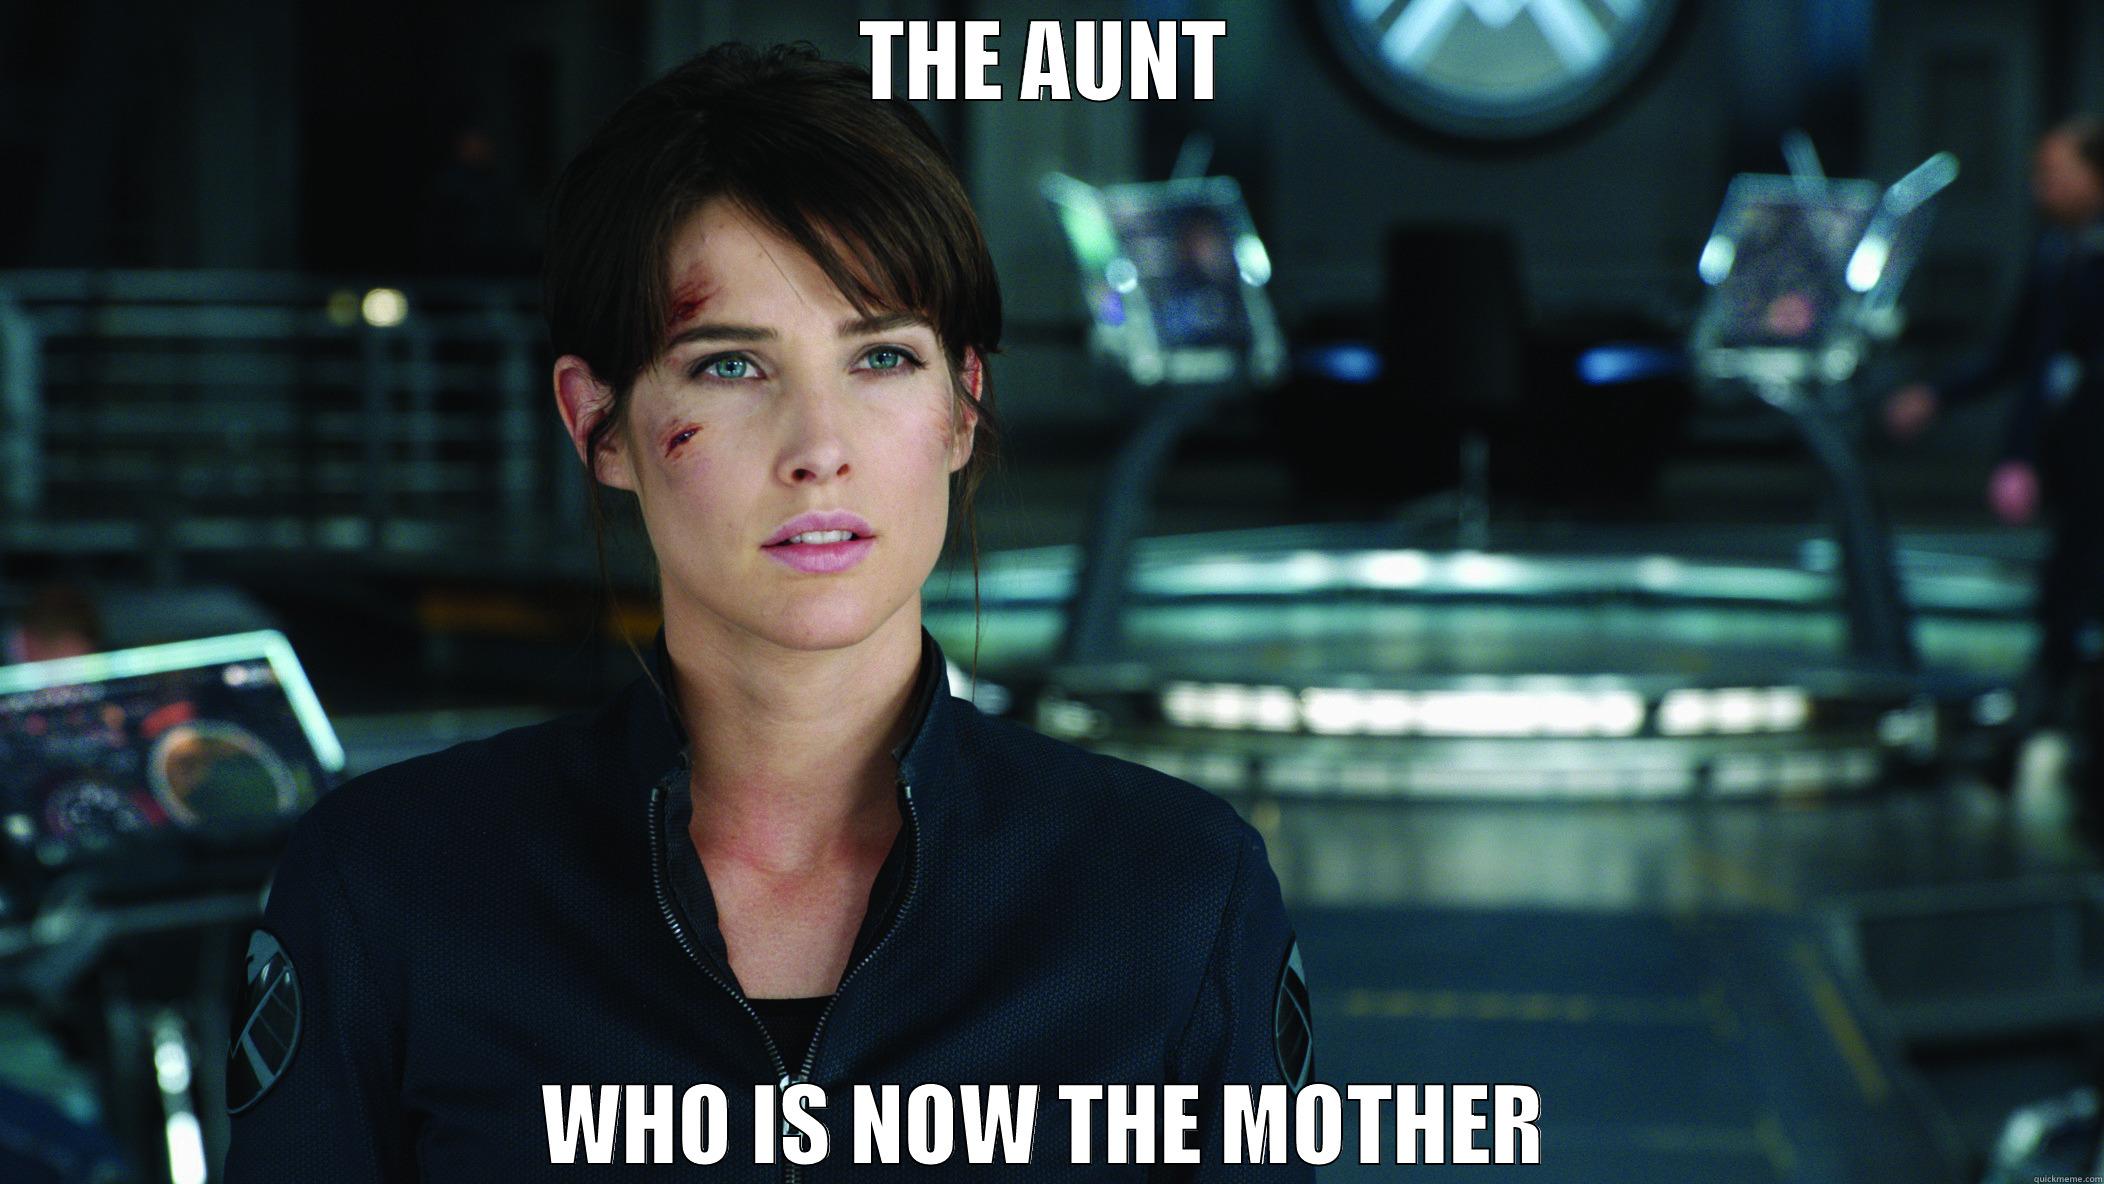 THE AUNT WHO IS NOW THE MOTHER Misc